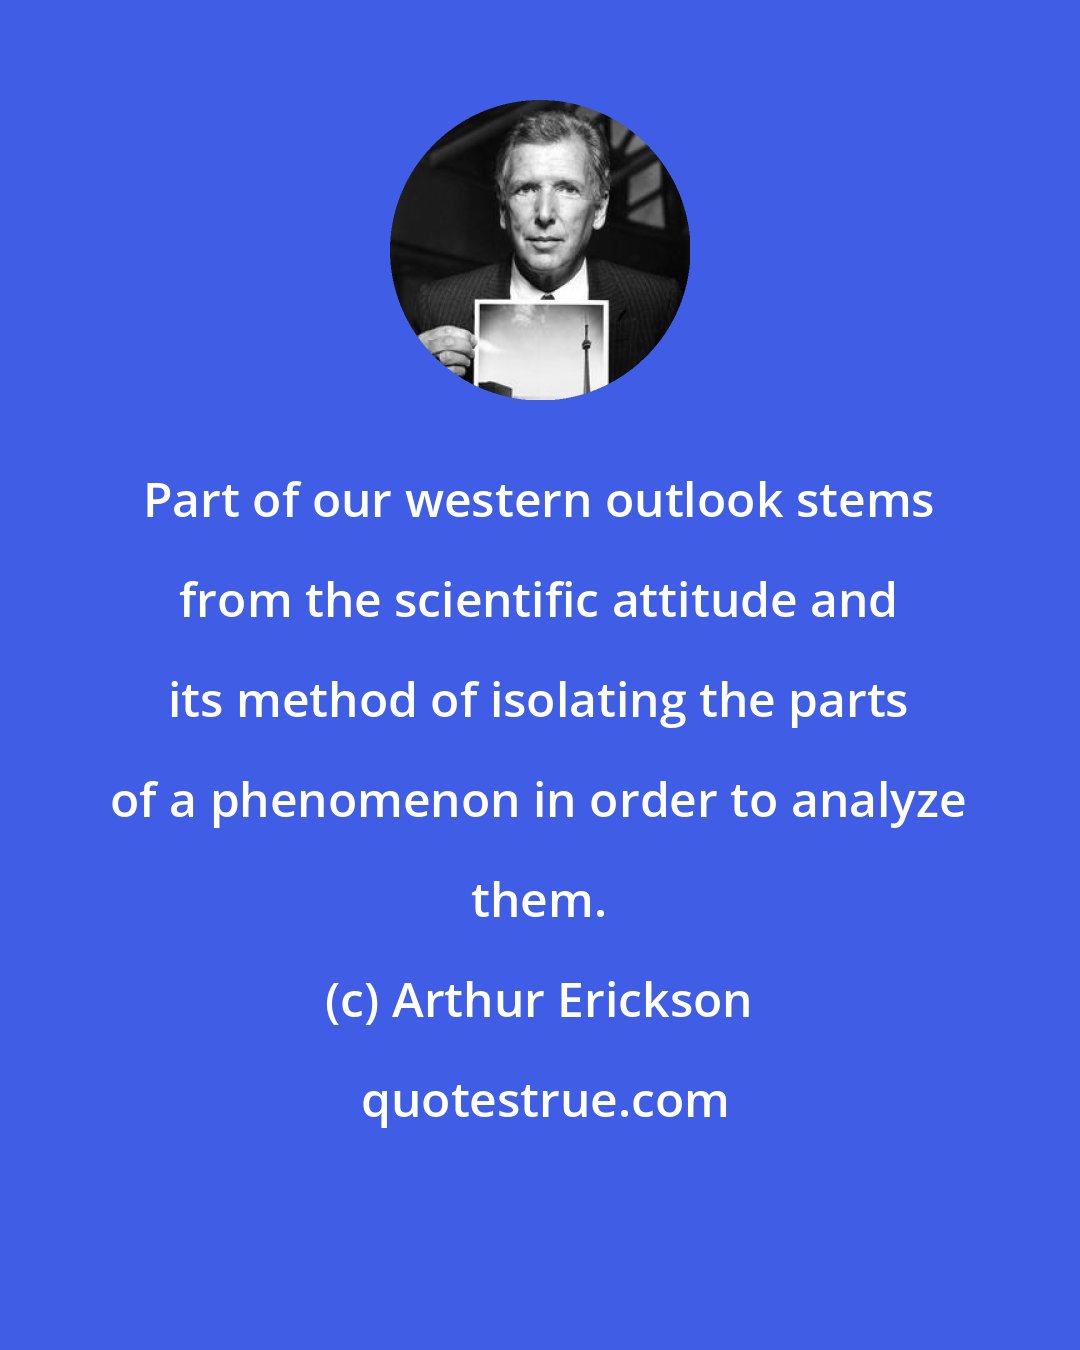 Arthur Erickson: Part of our western outlook stems from the scientific attitude and its method of isolating the parts of a phenomenon in order to analyze them.